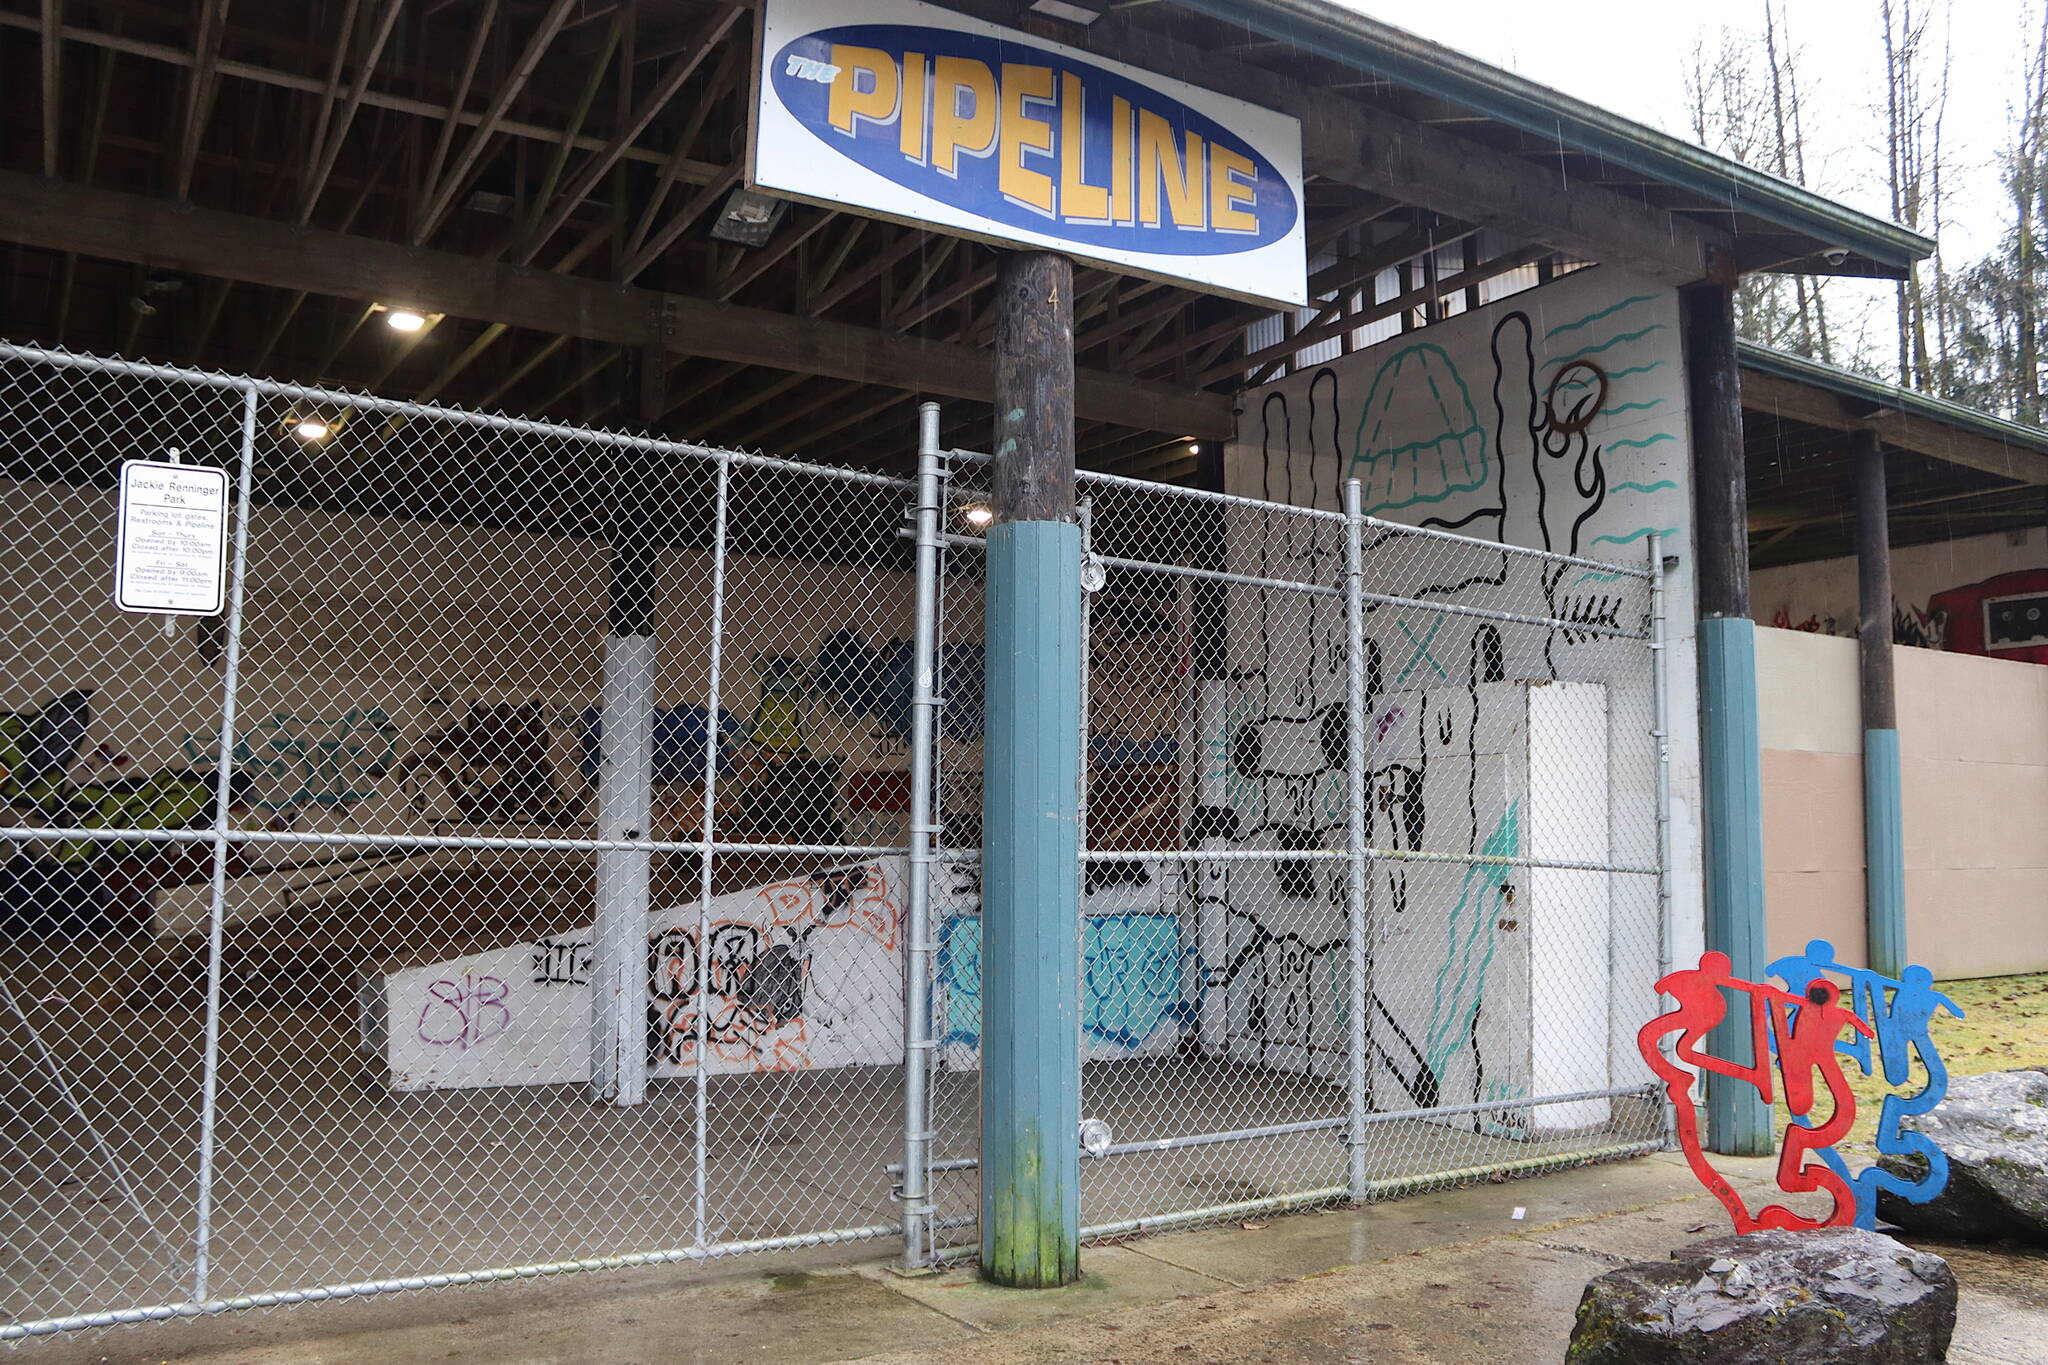 The gates are locked at the Pipeline Skate Park at midday Thursday, after Juneau’s Parks and Recreation Department announced the facility will be open limited hours until further notice due to an increase in vandalism and drug paraphernalia. (Mark Sabbatini / Juneau Empire)